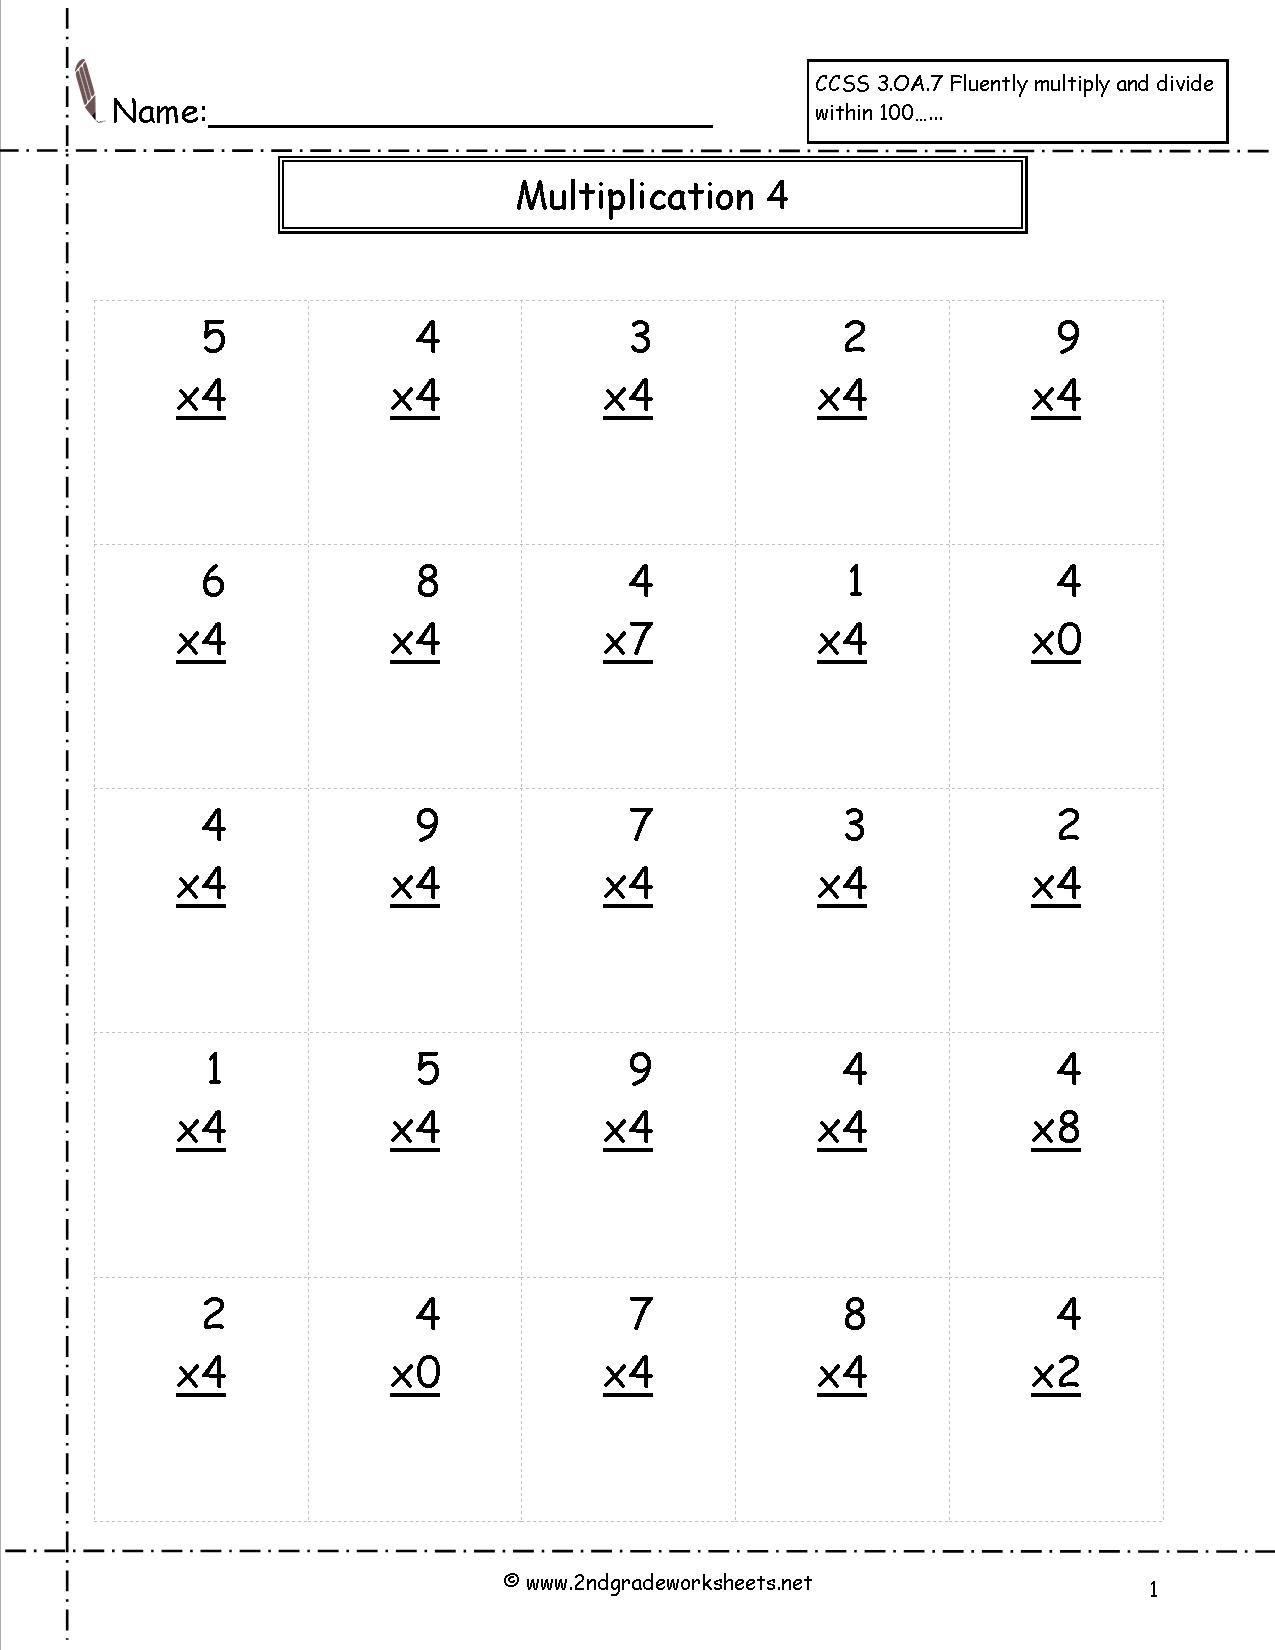 free-4th-grade-math-worksheets-tags-40-remarkable-4th-inside